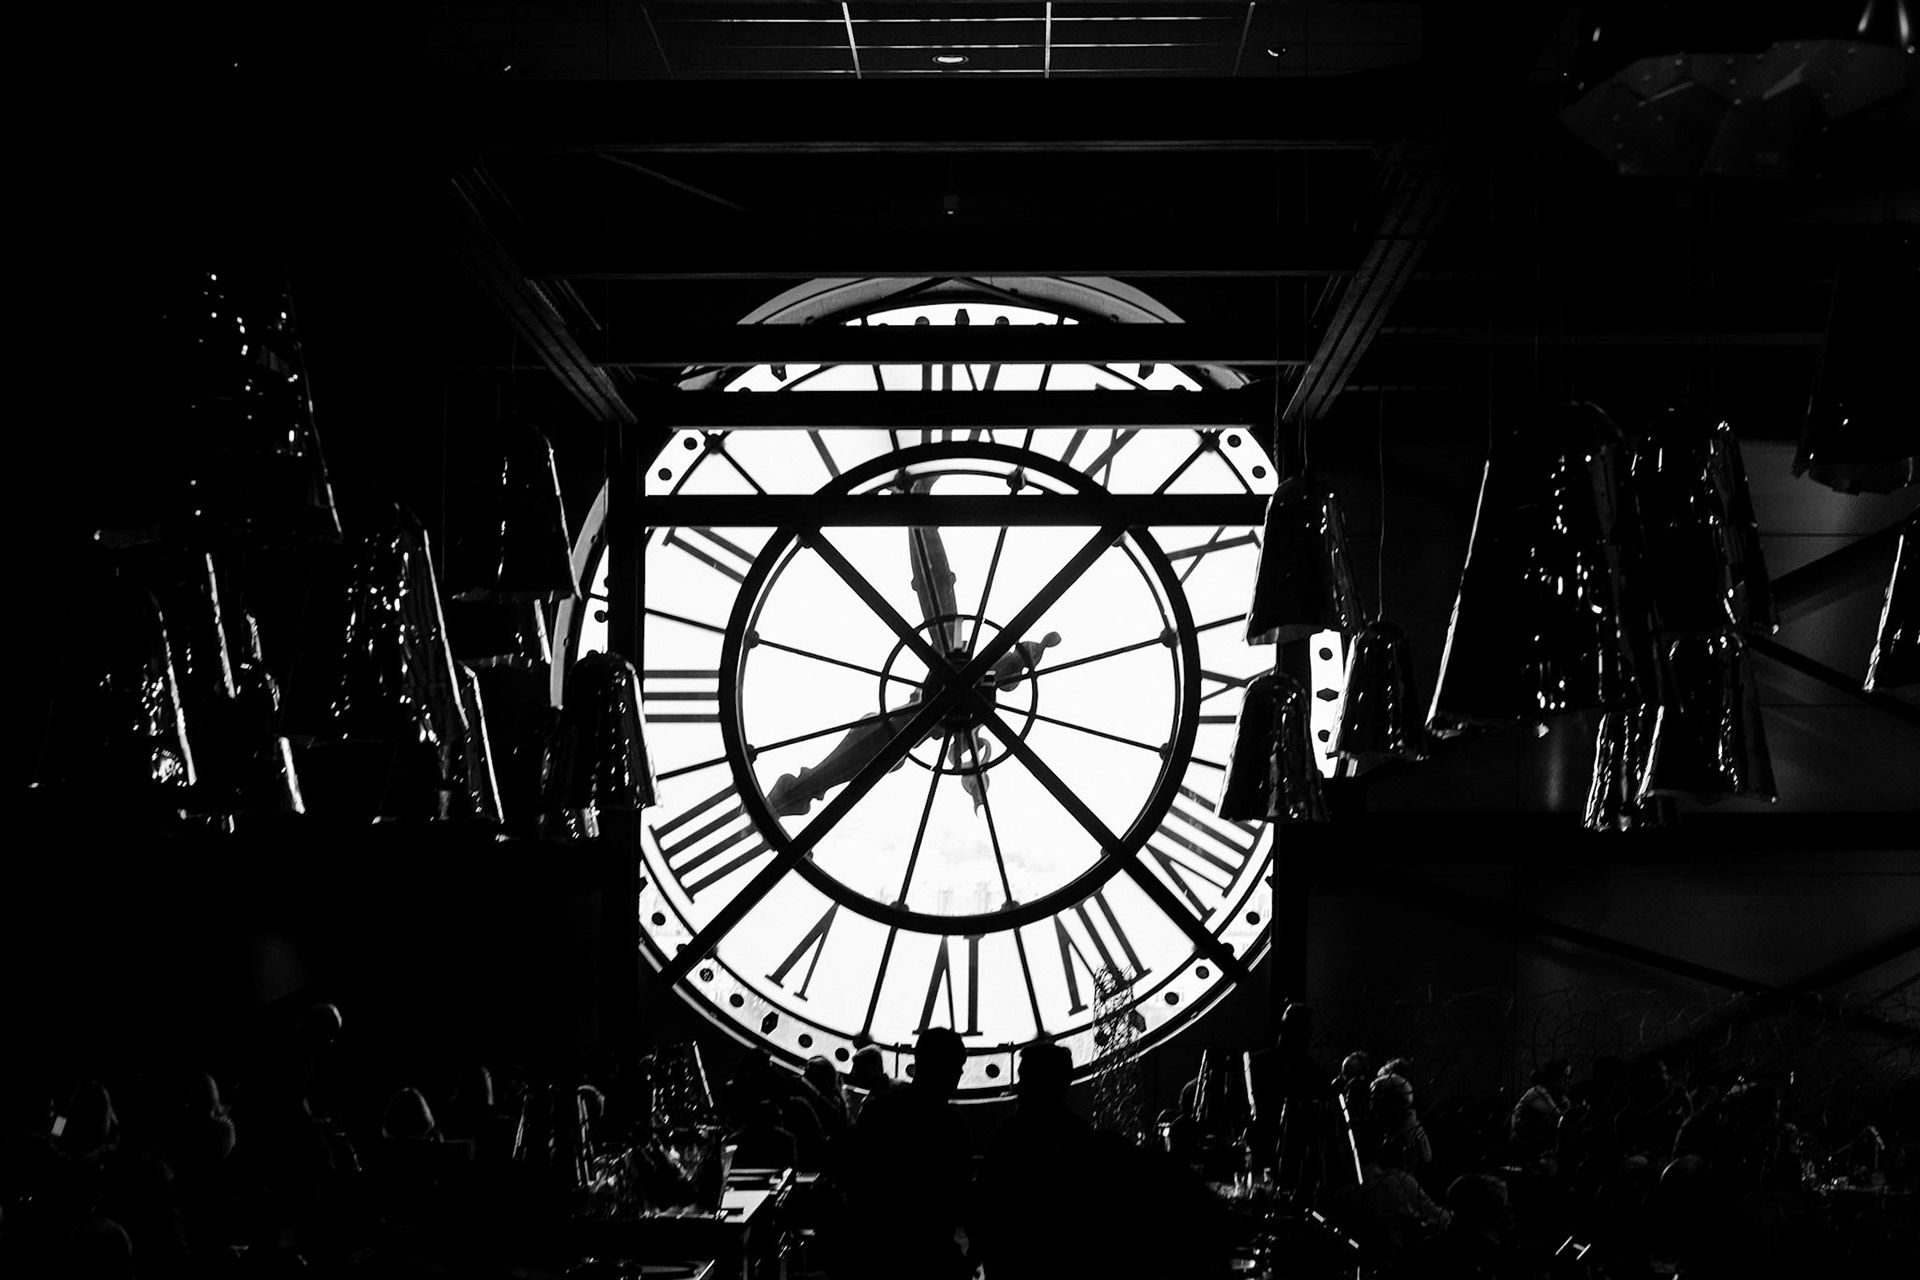 Clock in the Musée D’Orsay